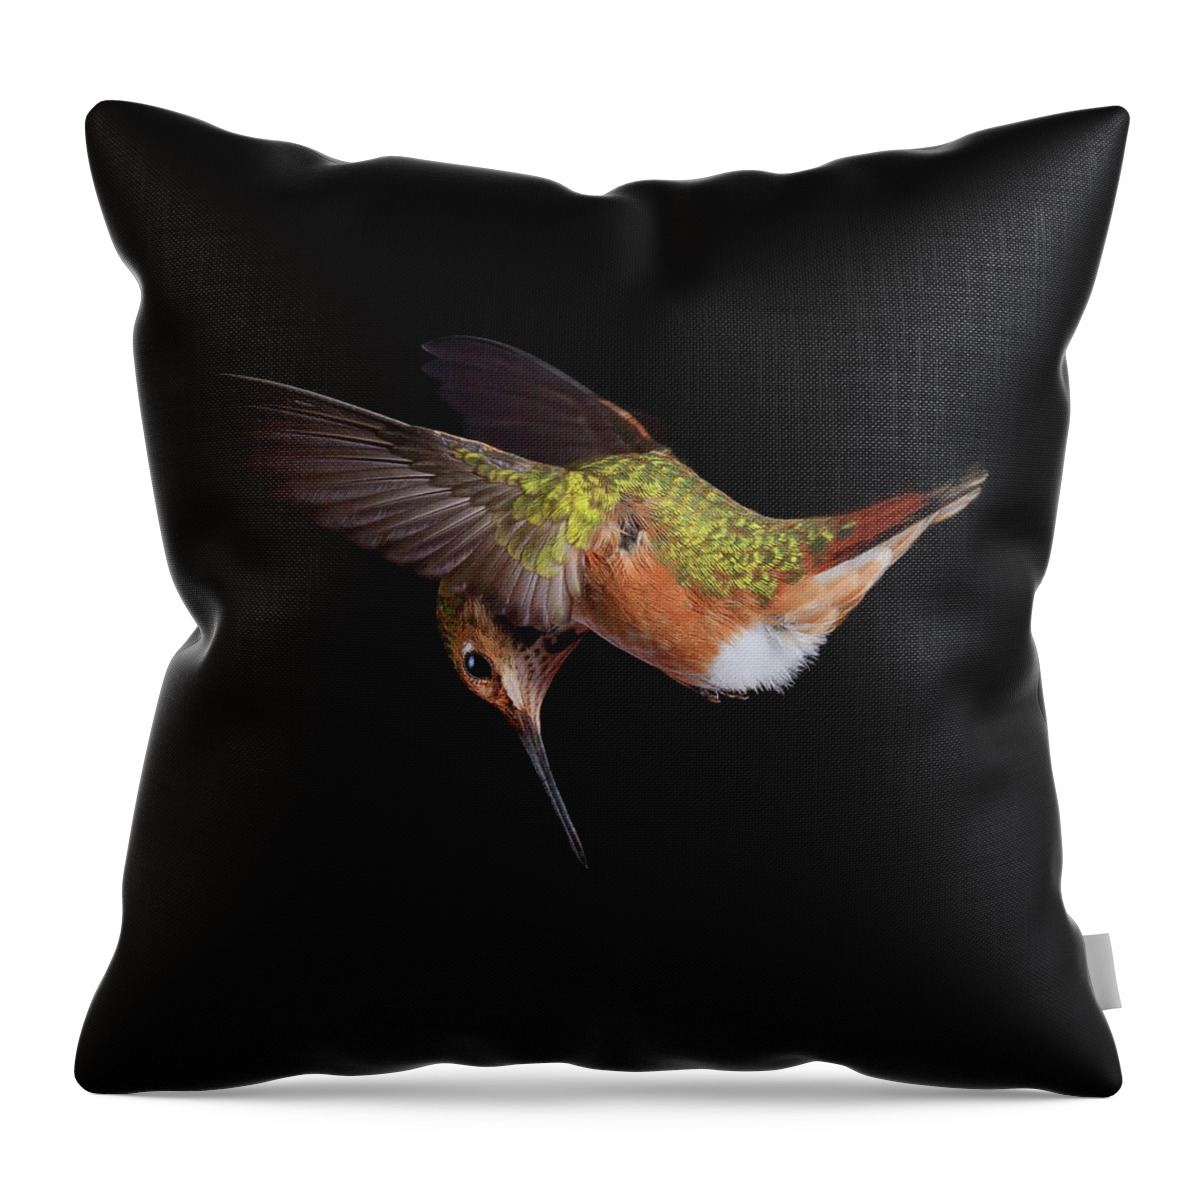 Animal Throw Pillow featuring the photograph Reconnaissance by Briand Sanderson